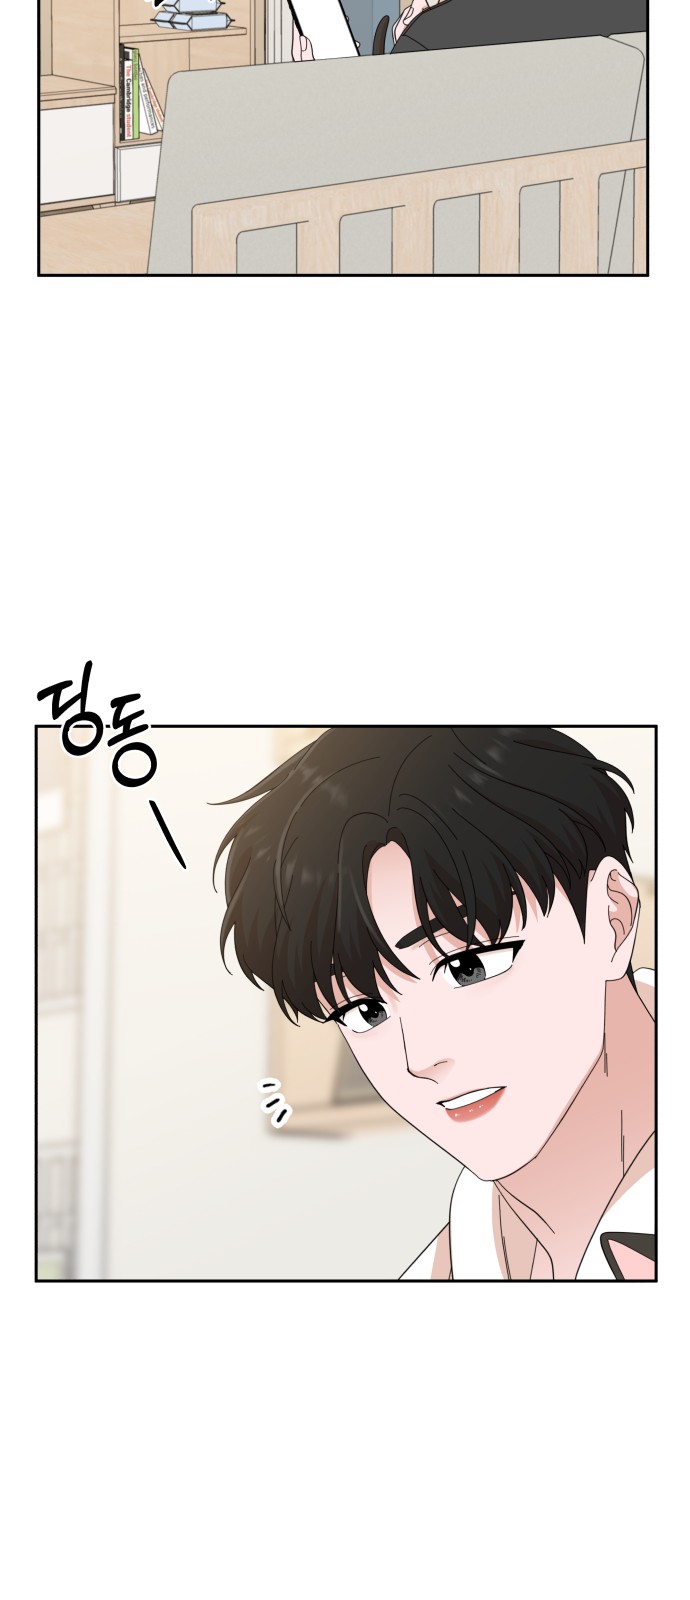 The Man With Pretty Lips - Chapter 37 - Page 67